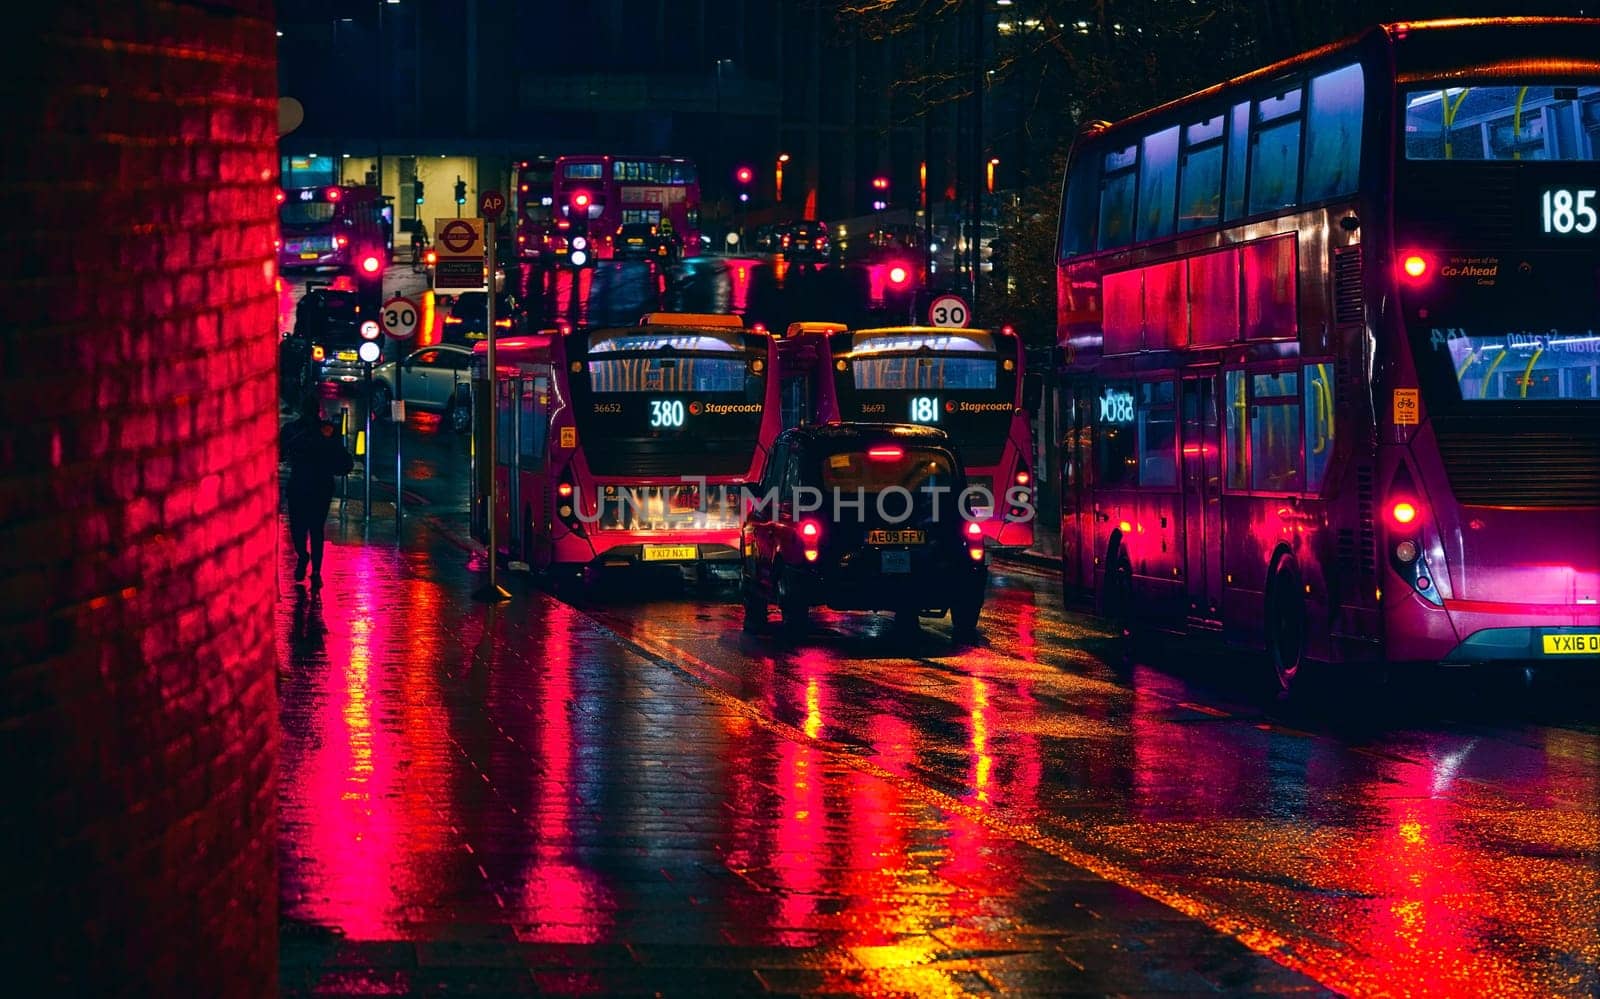 London, United Kingdom - February 01, 2019: Buses and taxis stuck in heavy traffic on a rainy evening near Lewisham station, bright red lights reflected in wet road and pavement by Ivanko